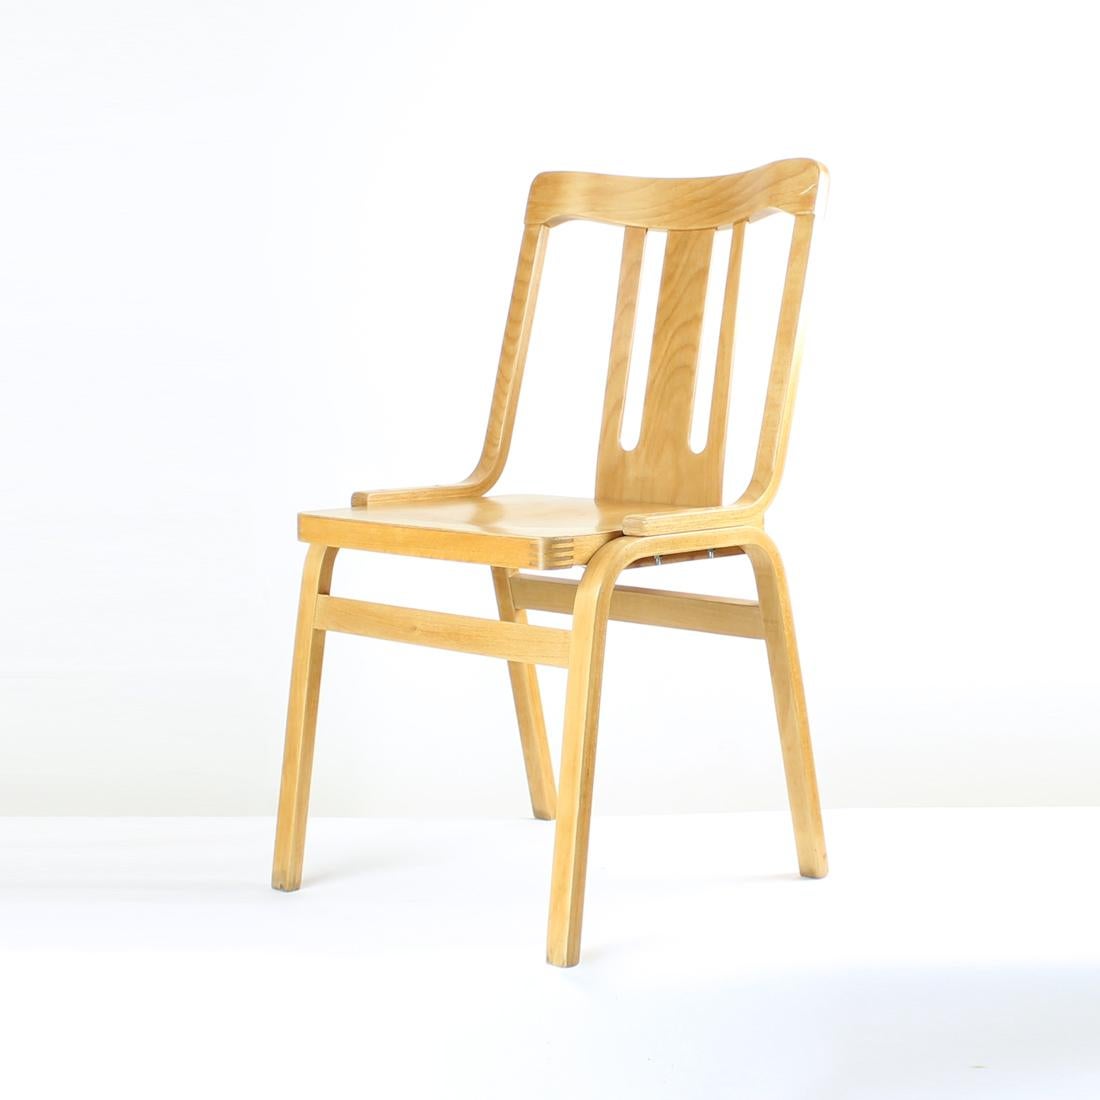 Mid-Century Modern Midcentury Wooden Dining Chair by Ton, Czechoslovakia 1960s For Sale